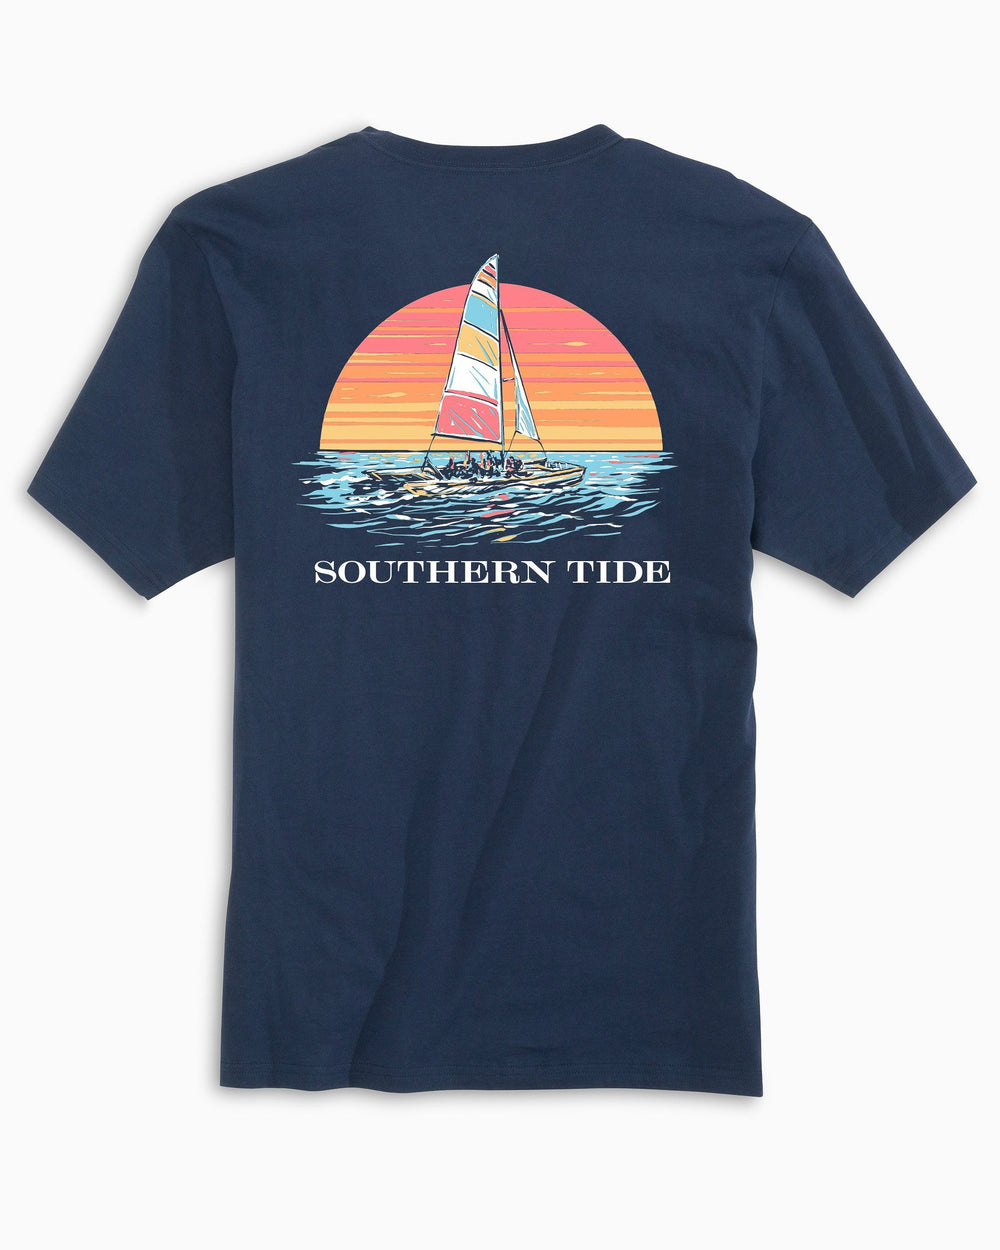 The back view of the Sunset Silhouette T-Shirt by Southern Tide - Navy